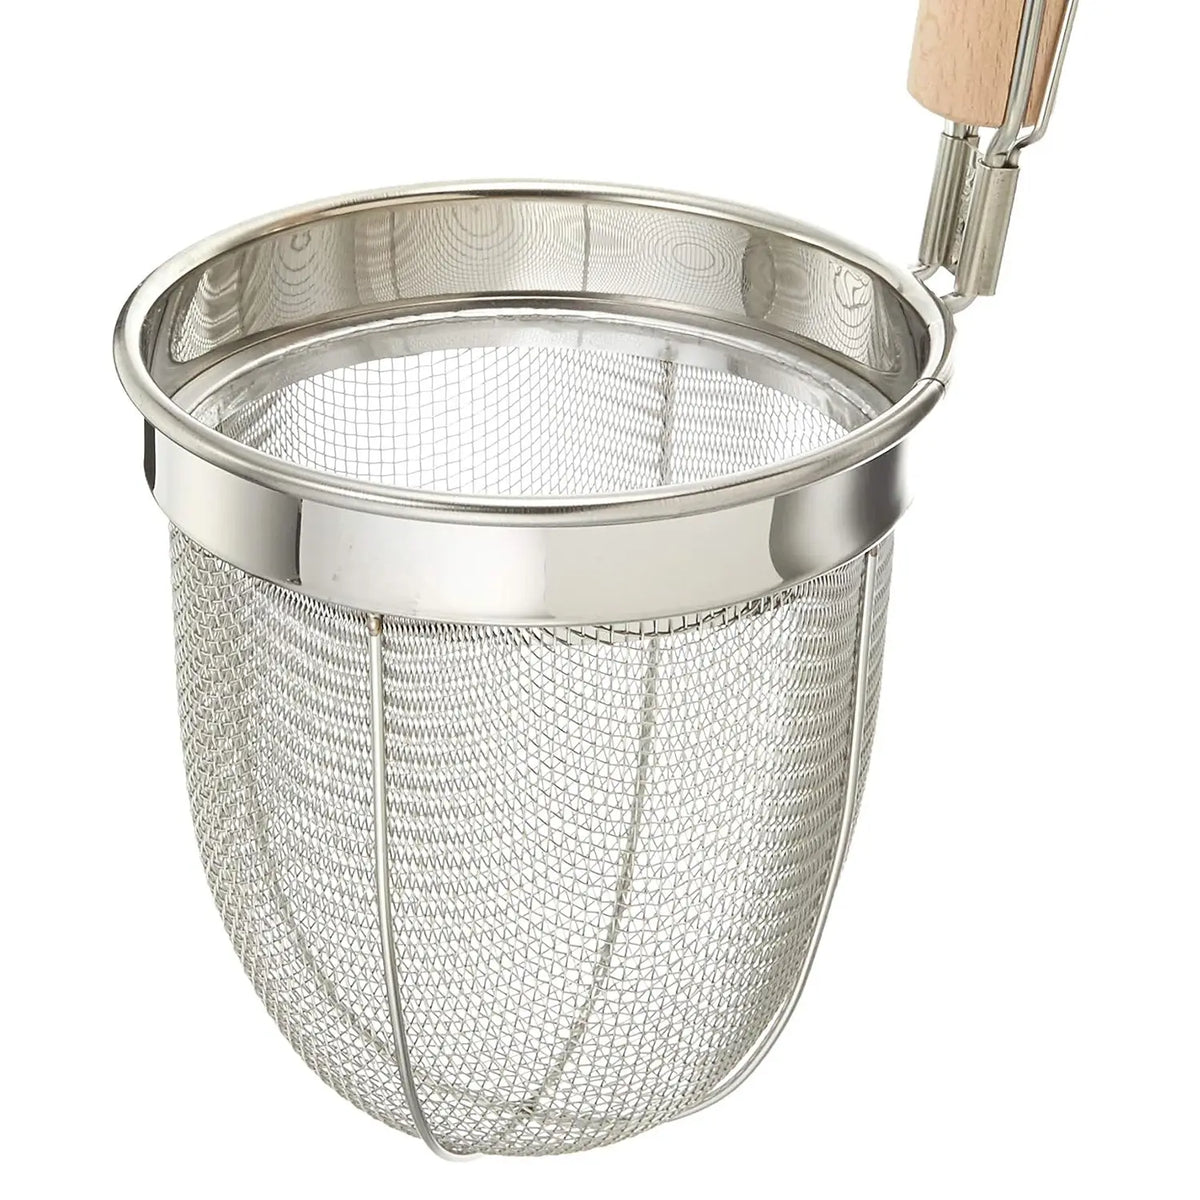 Fujiboshi Stainless Steel Udon Tebo Noodle Strainer Round Base with Wooden Handle